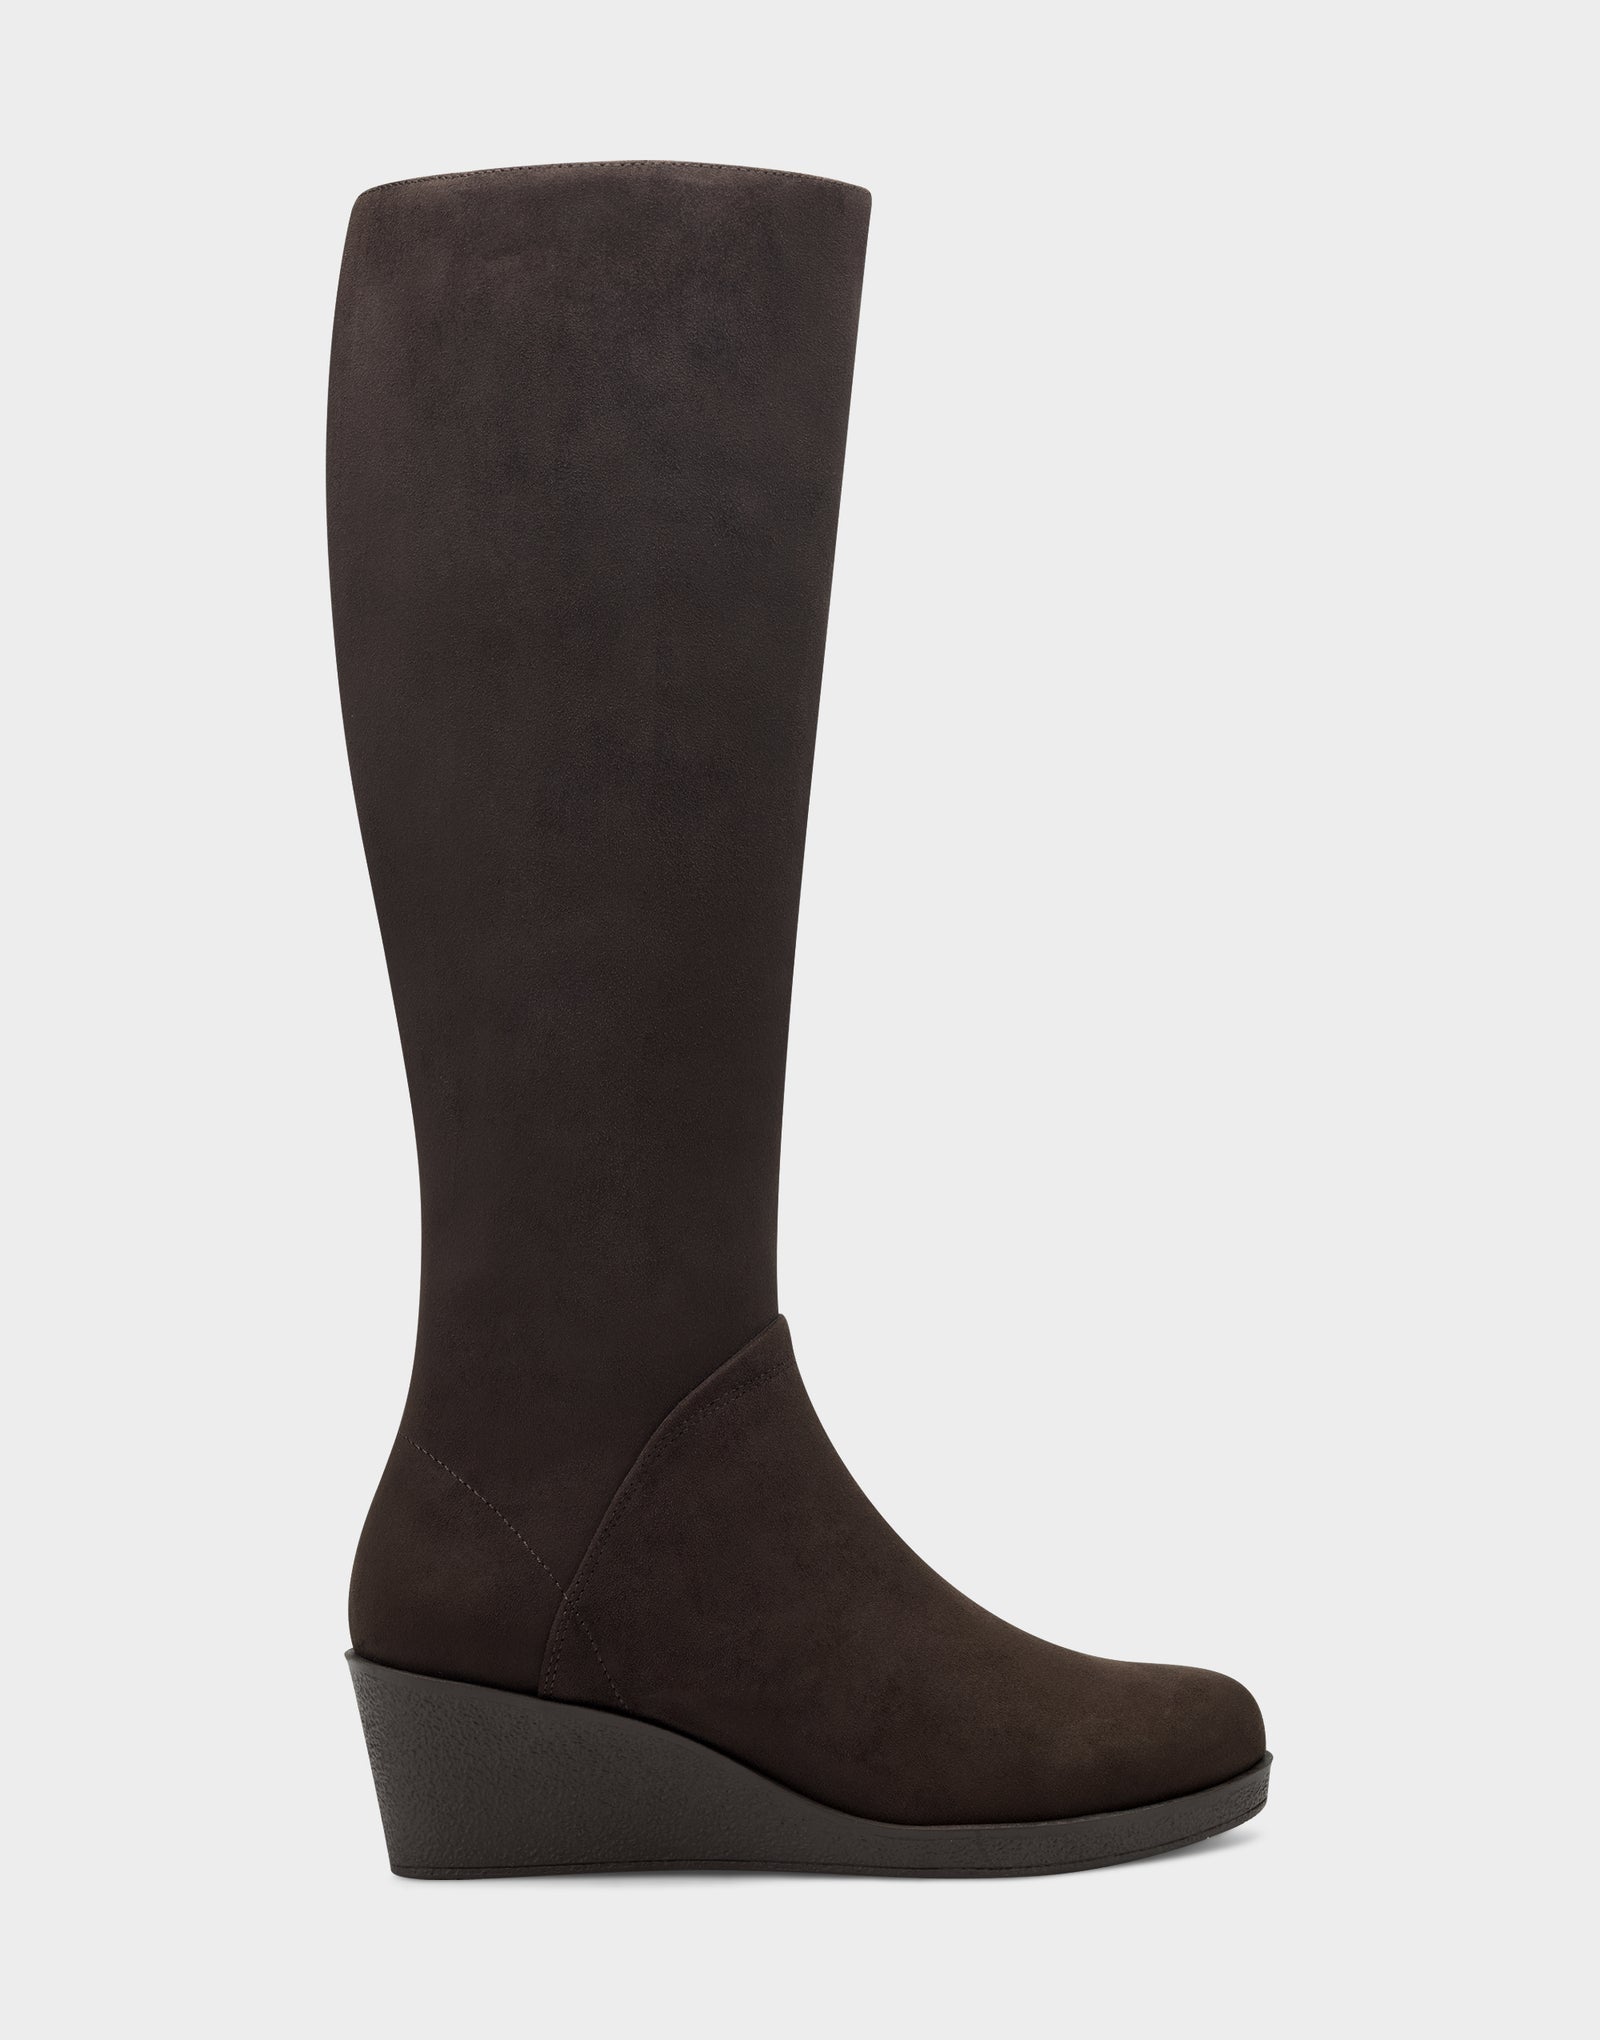 Women's Tall Boot in Brown